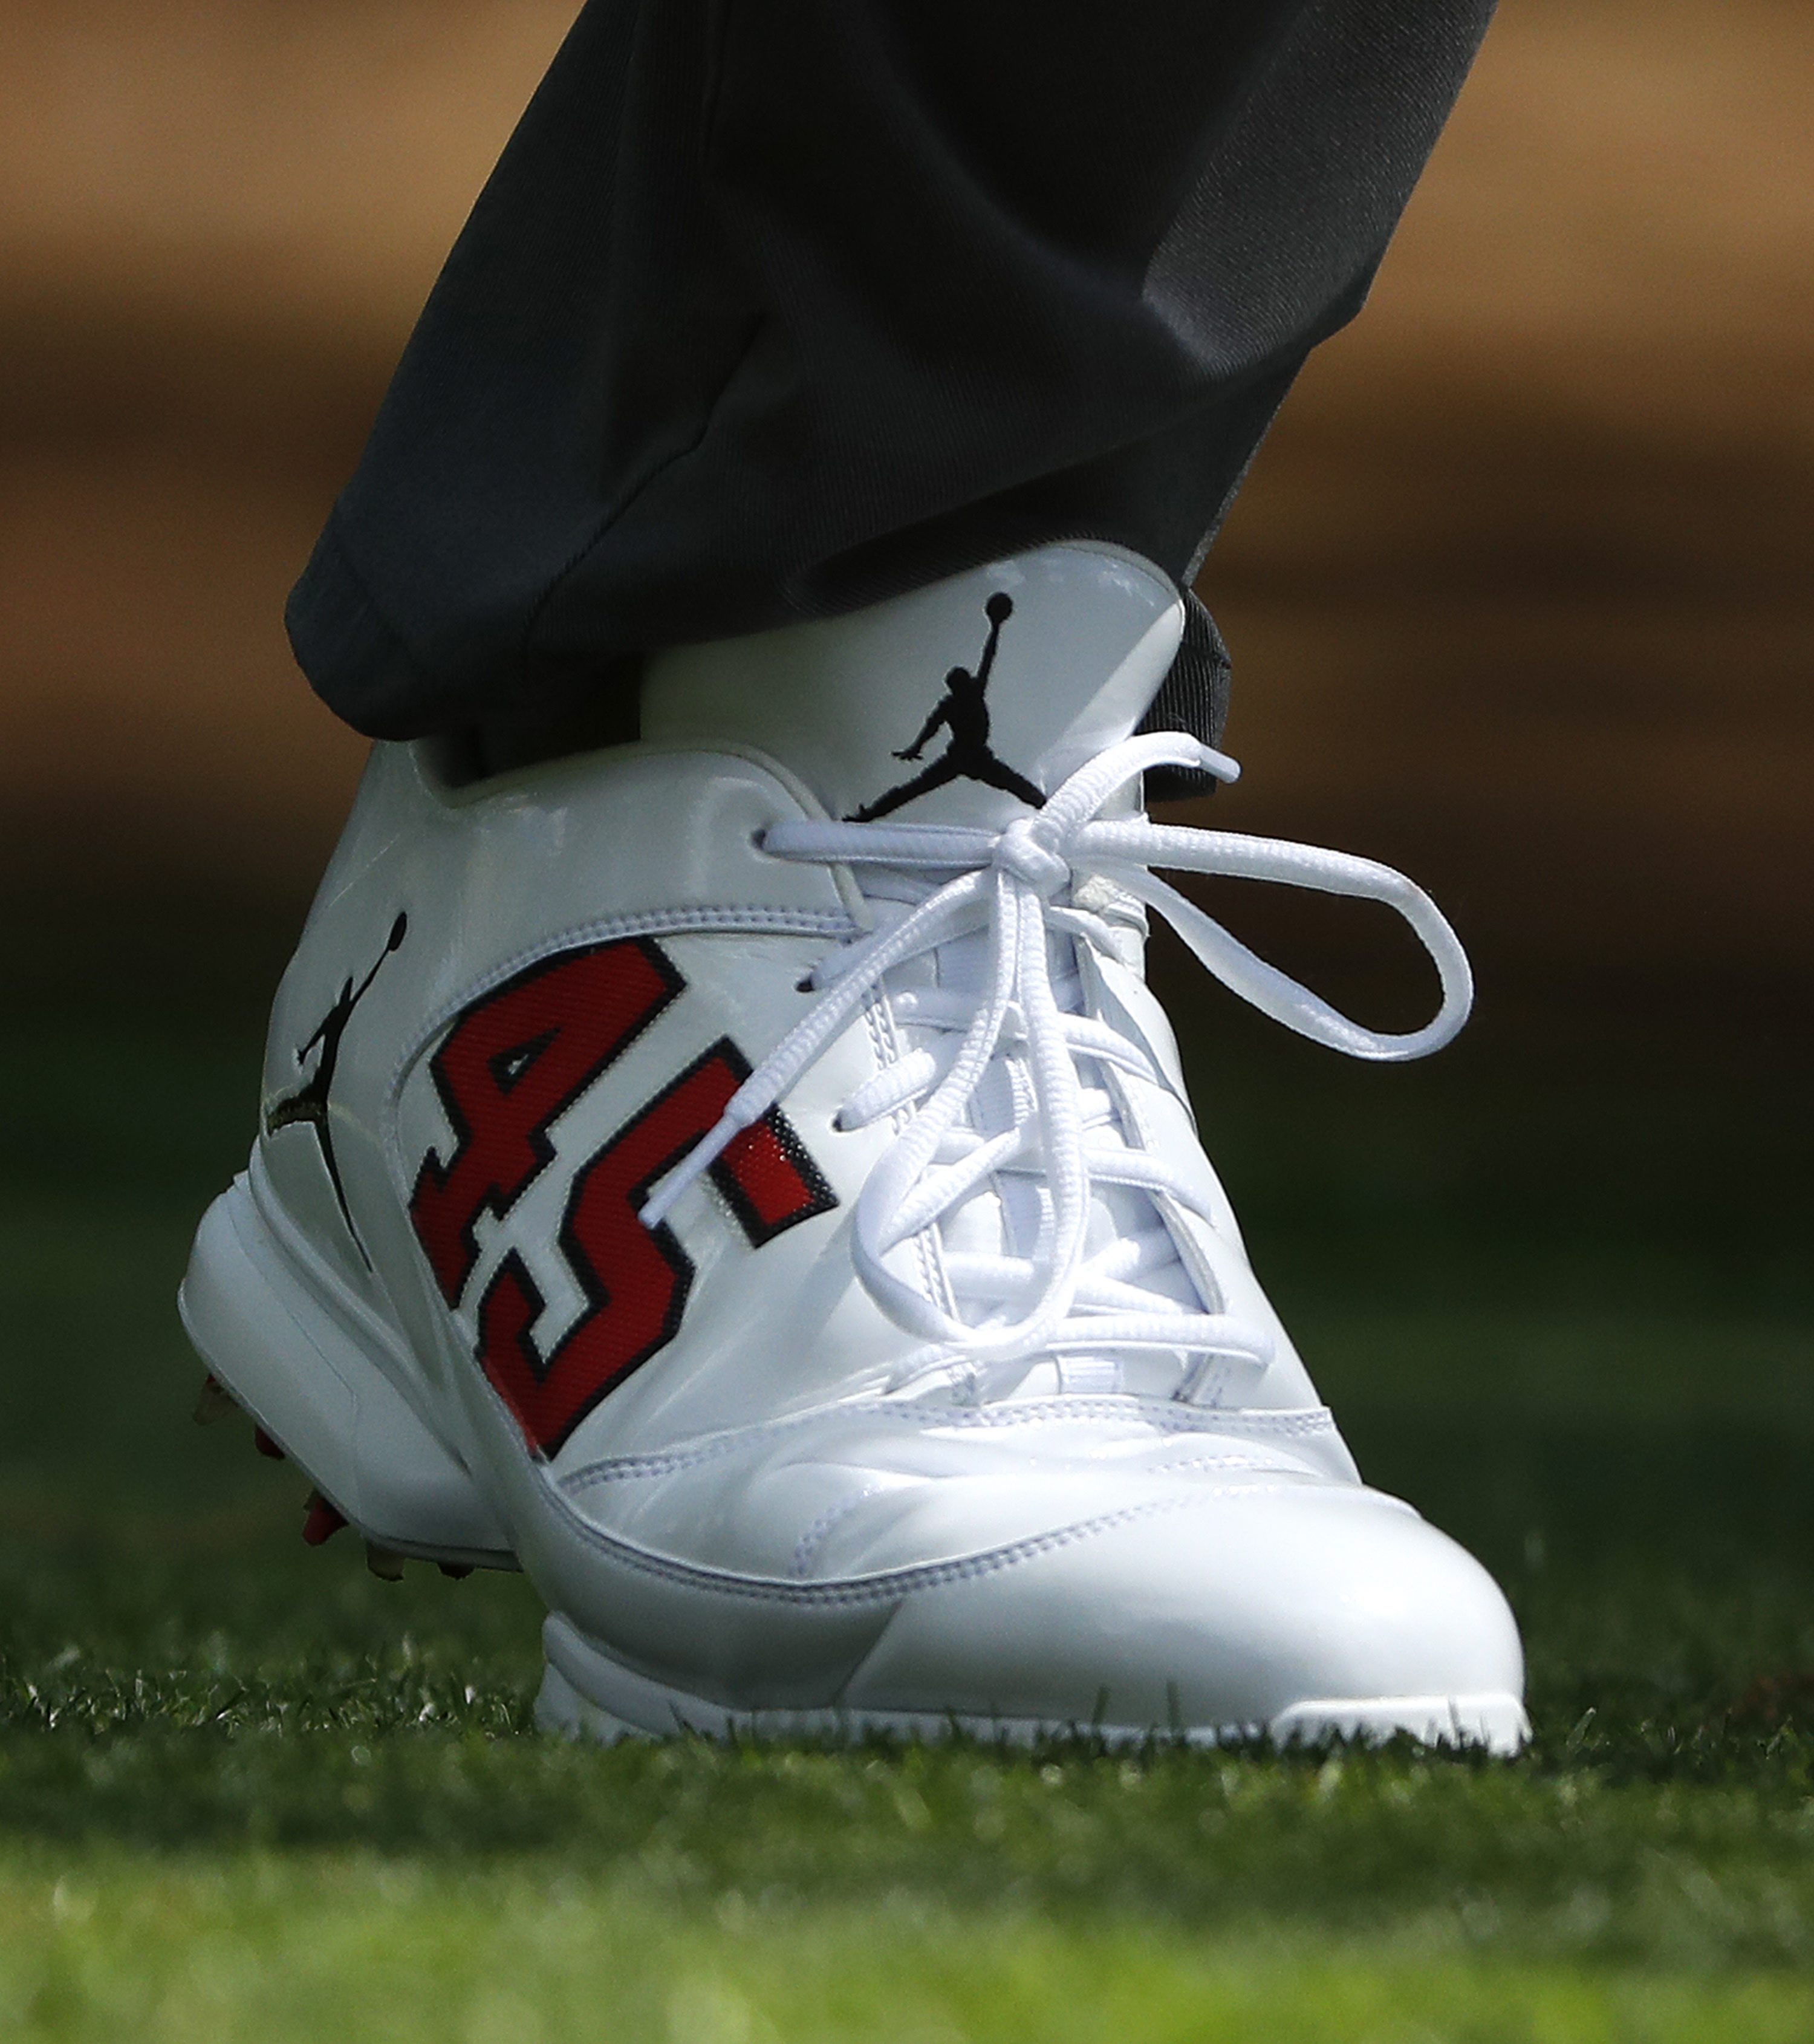 Keegan Bradley is rocking an awesome pair of Jordan golf shoes at the